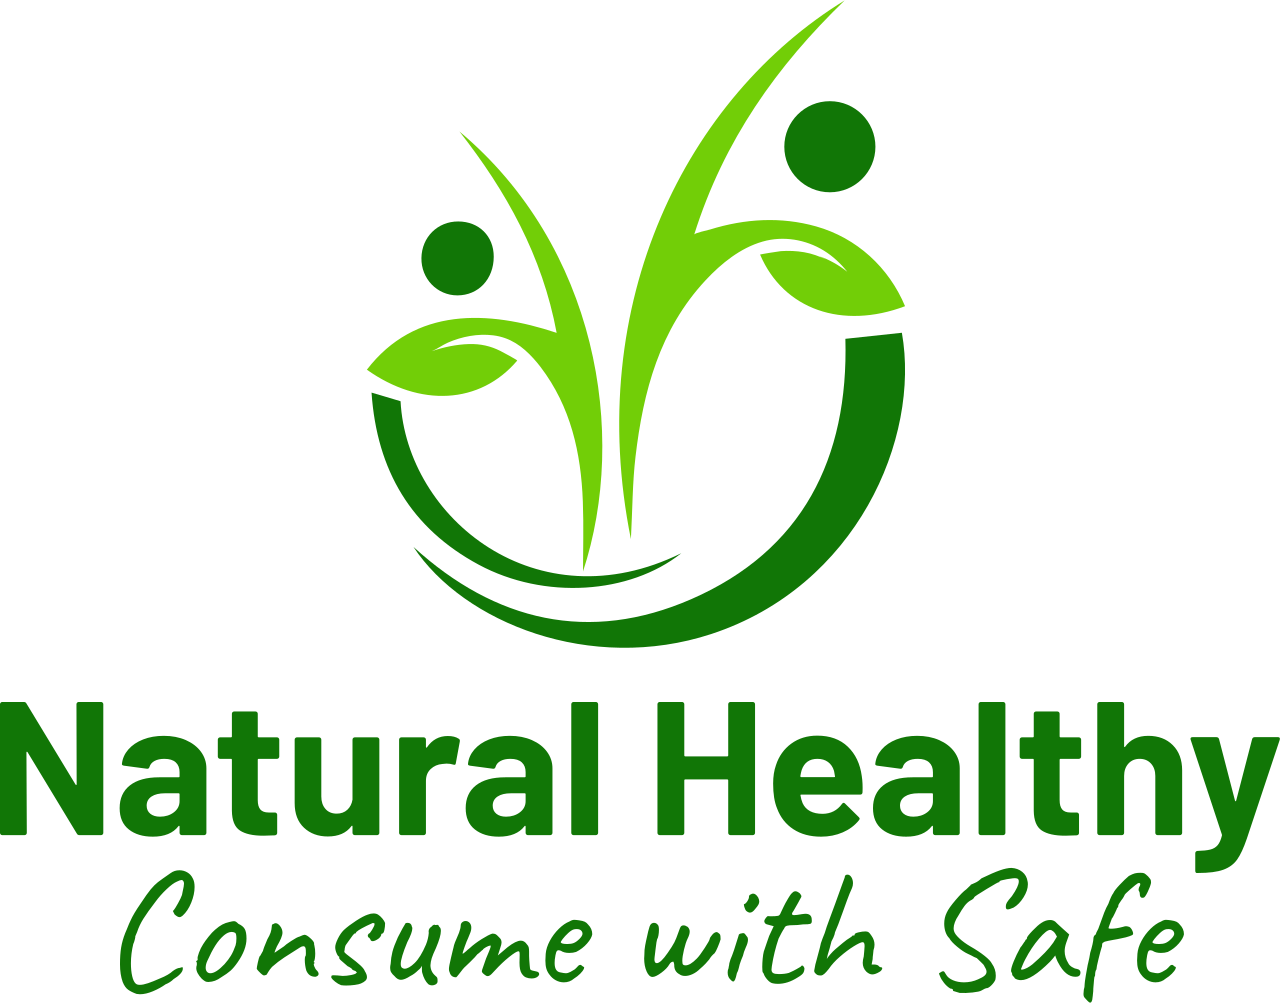 Natural Healthy's web page